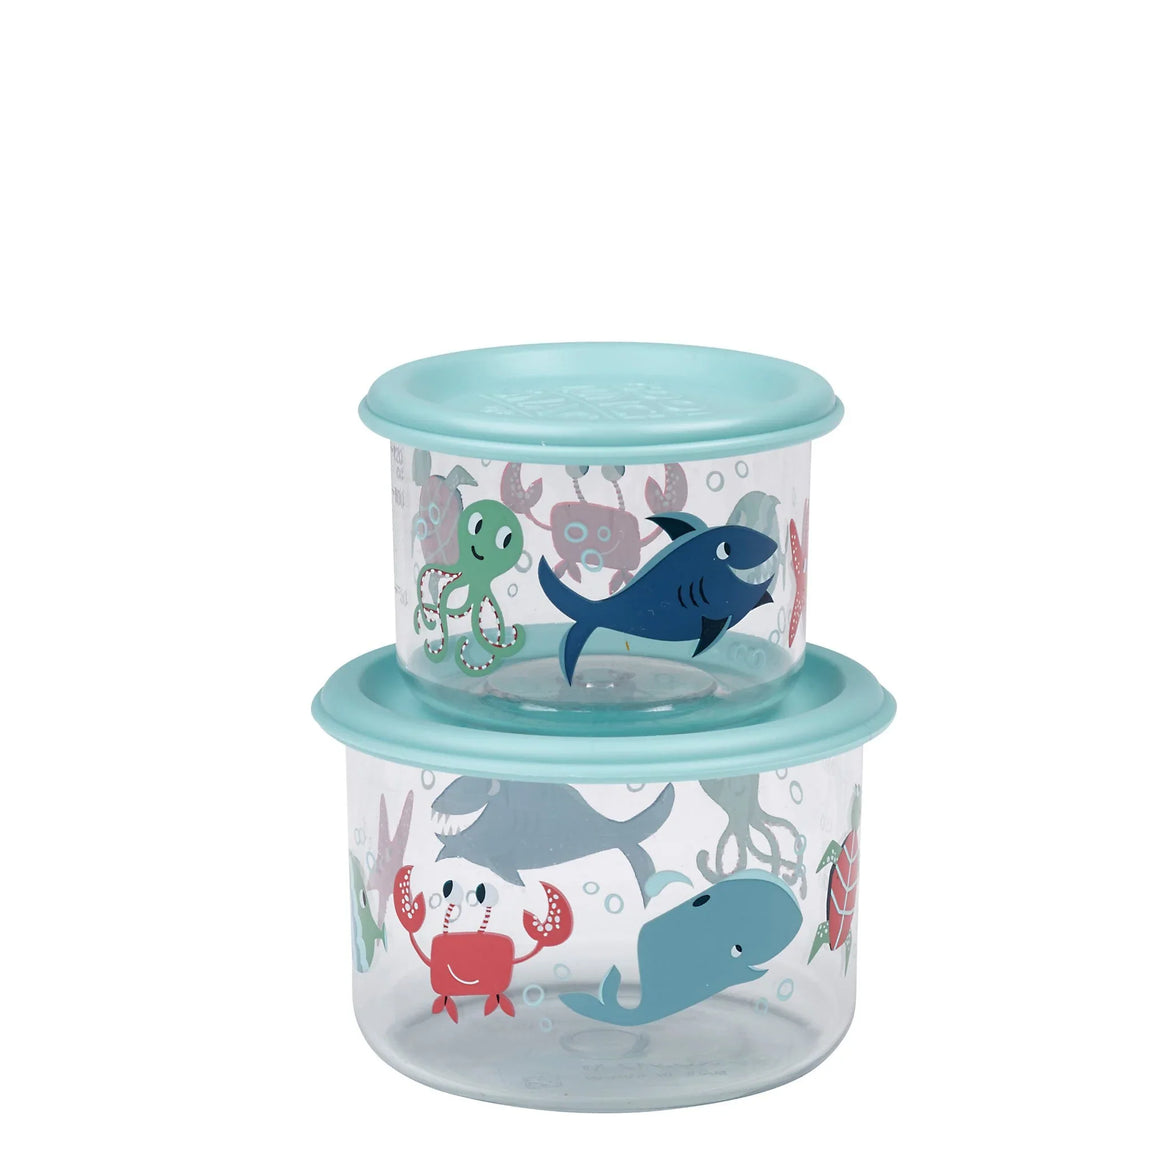 Ocean - Good Lunch Containers - Small 2 pcs.